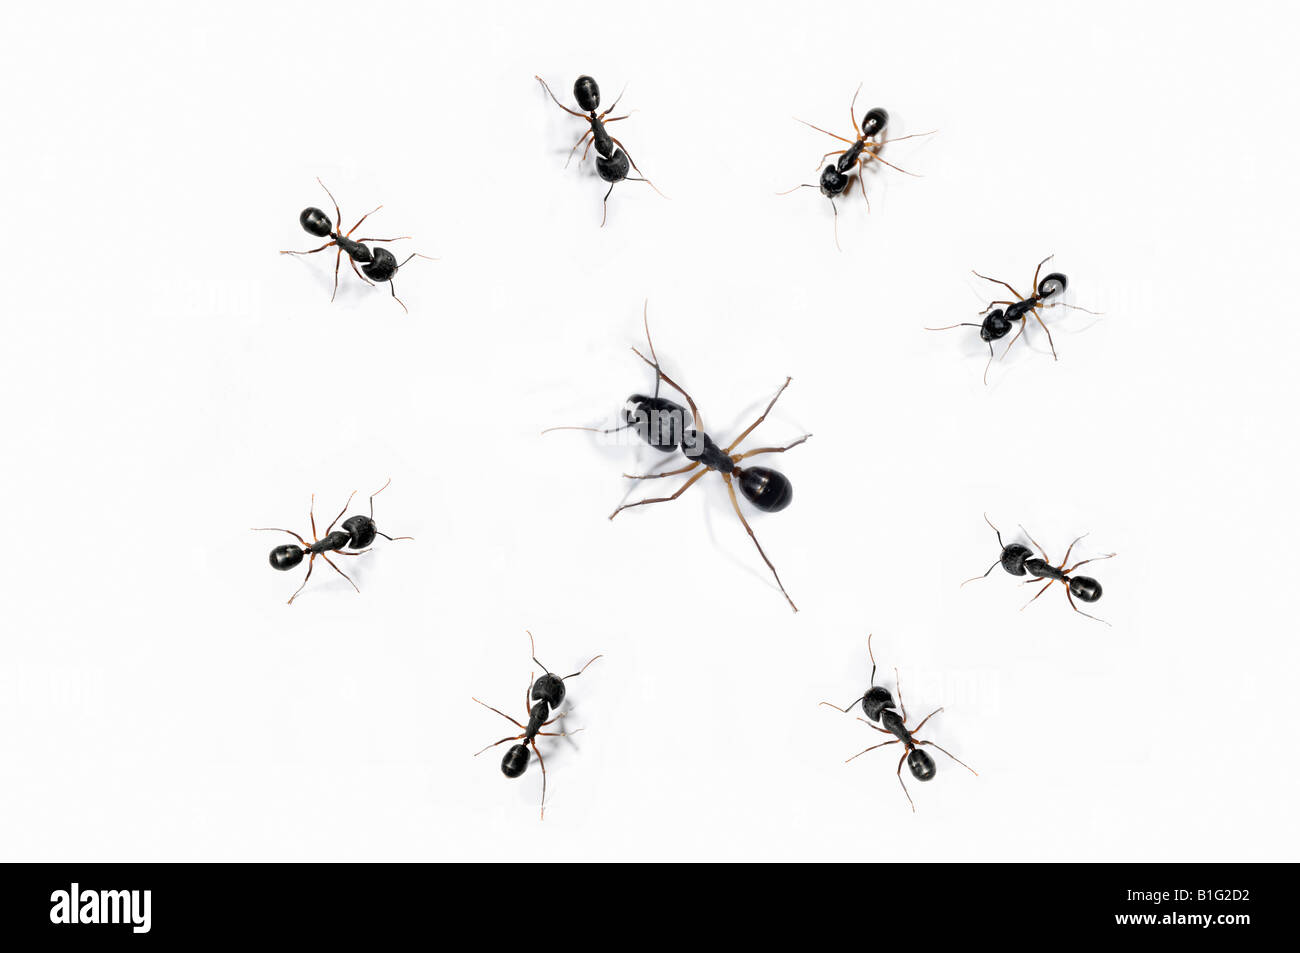 Group of small ants surrounding a large ant Stock Photo